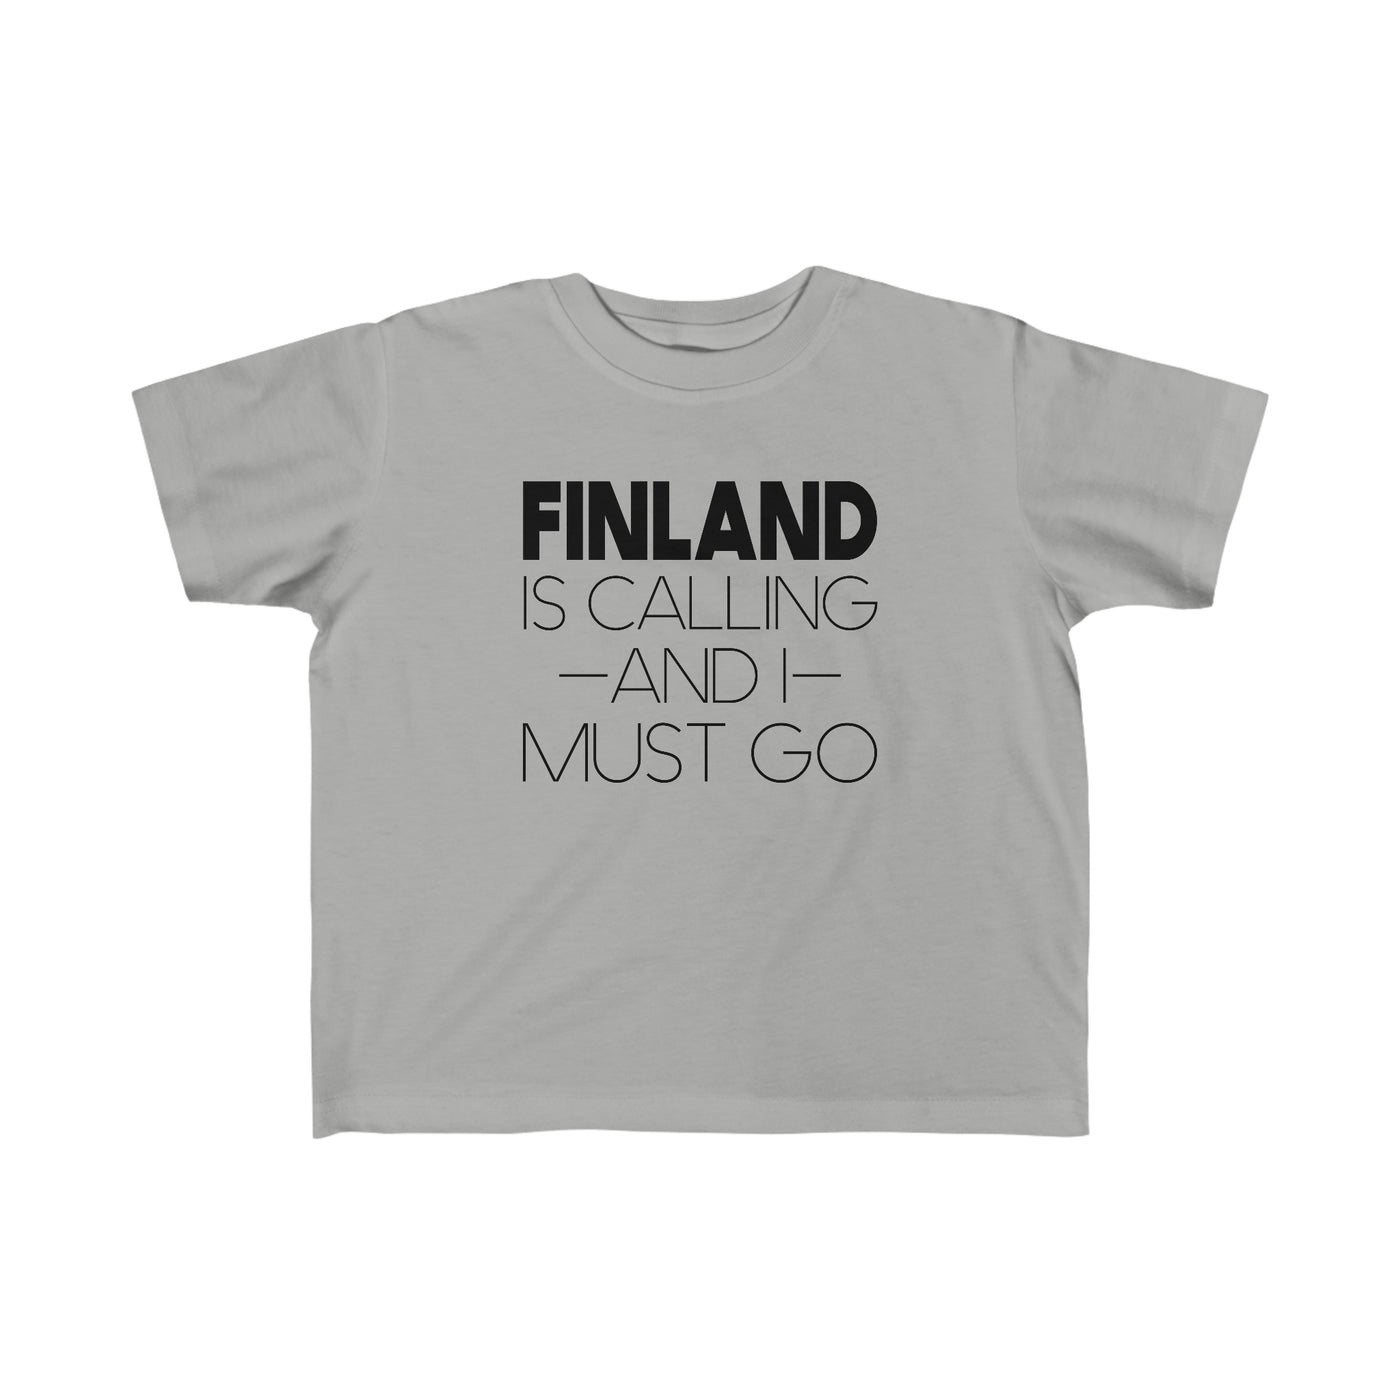 Finland Is Calling And I Must Go Toddler Tee